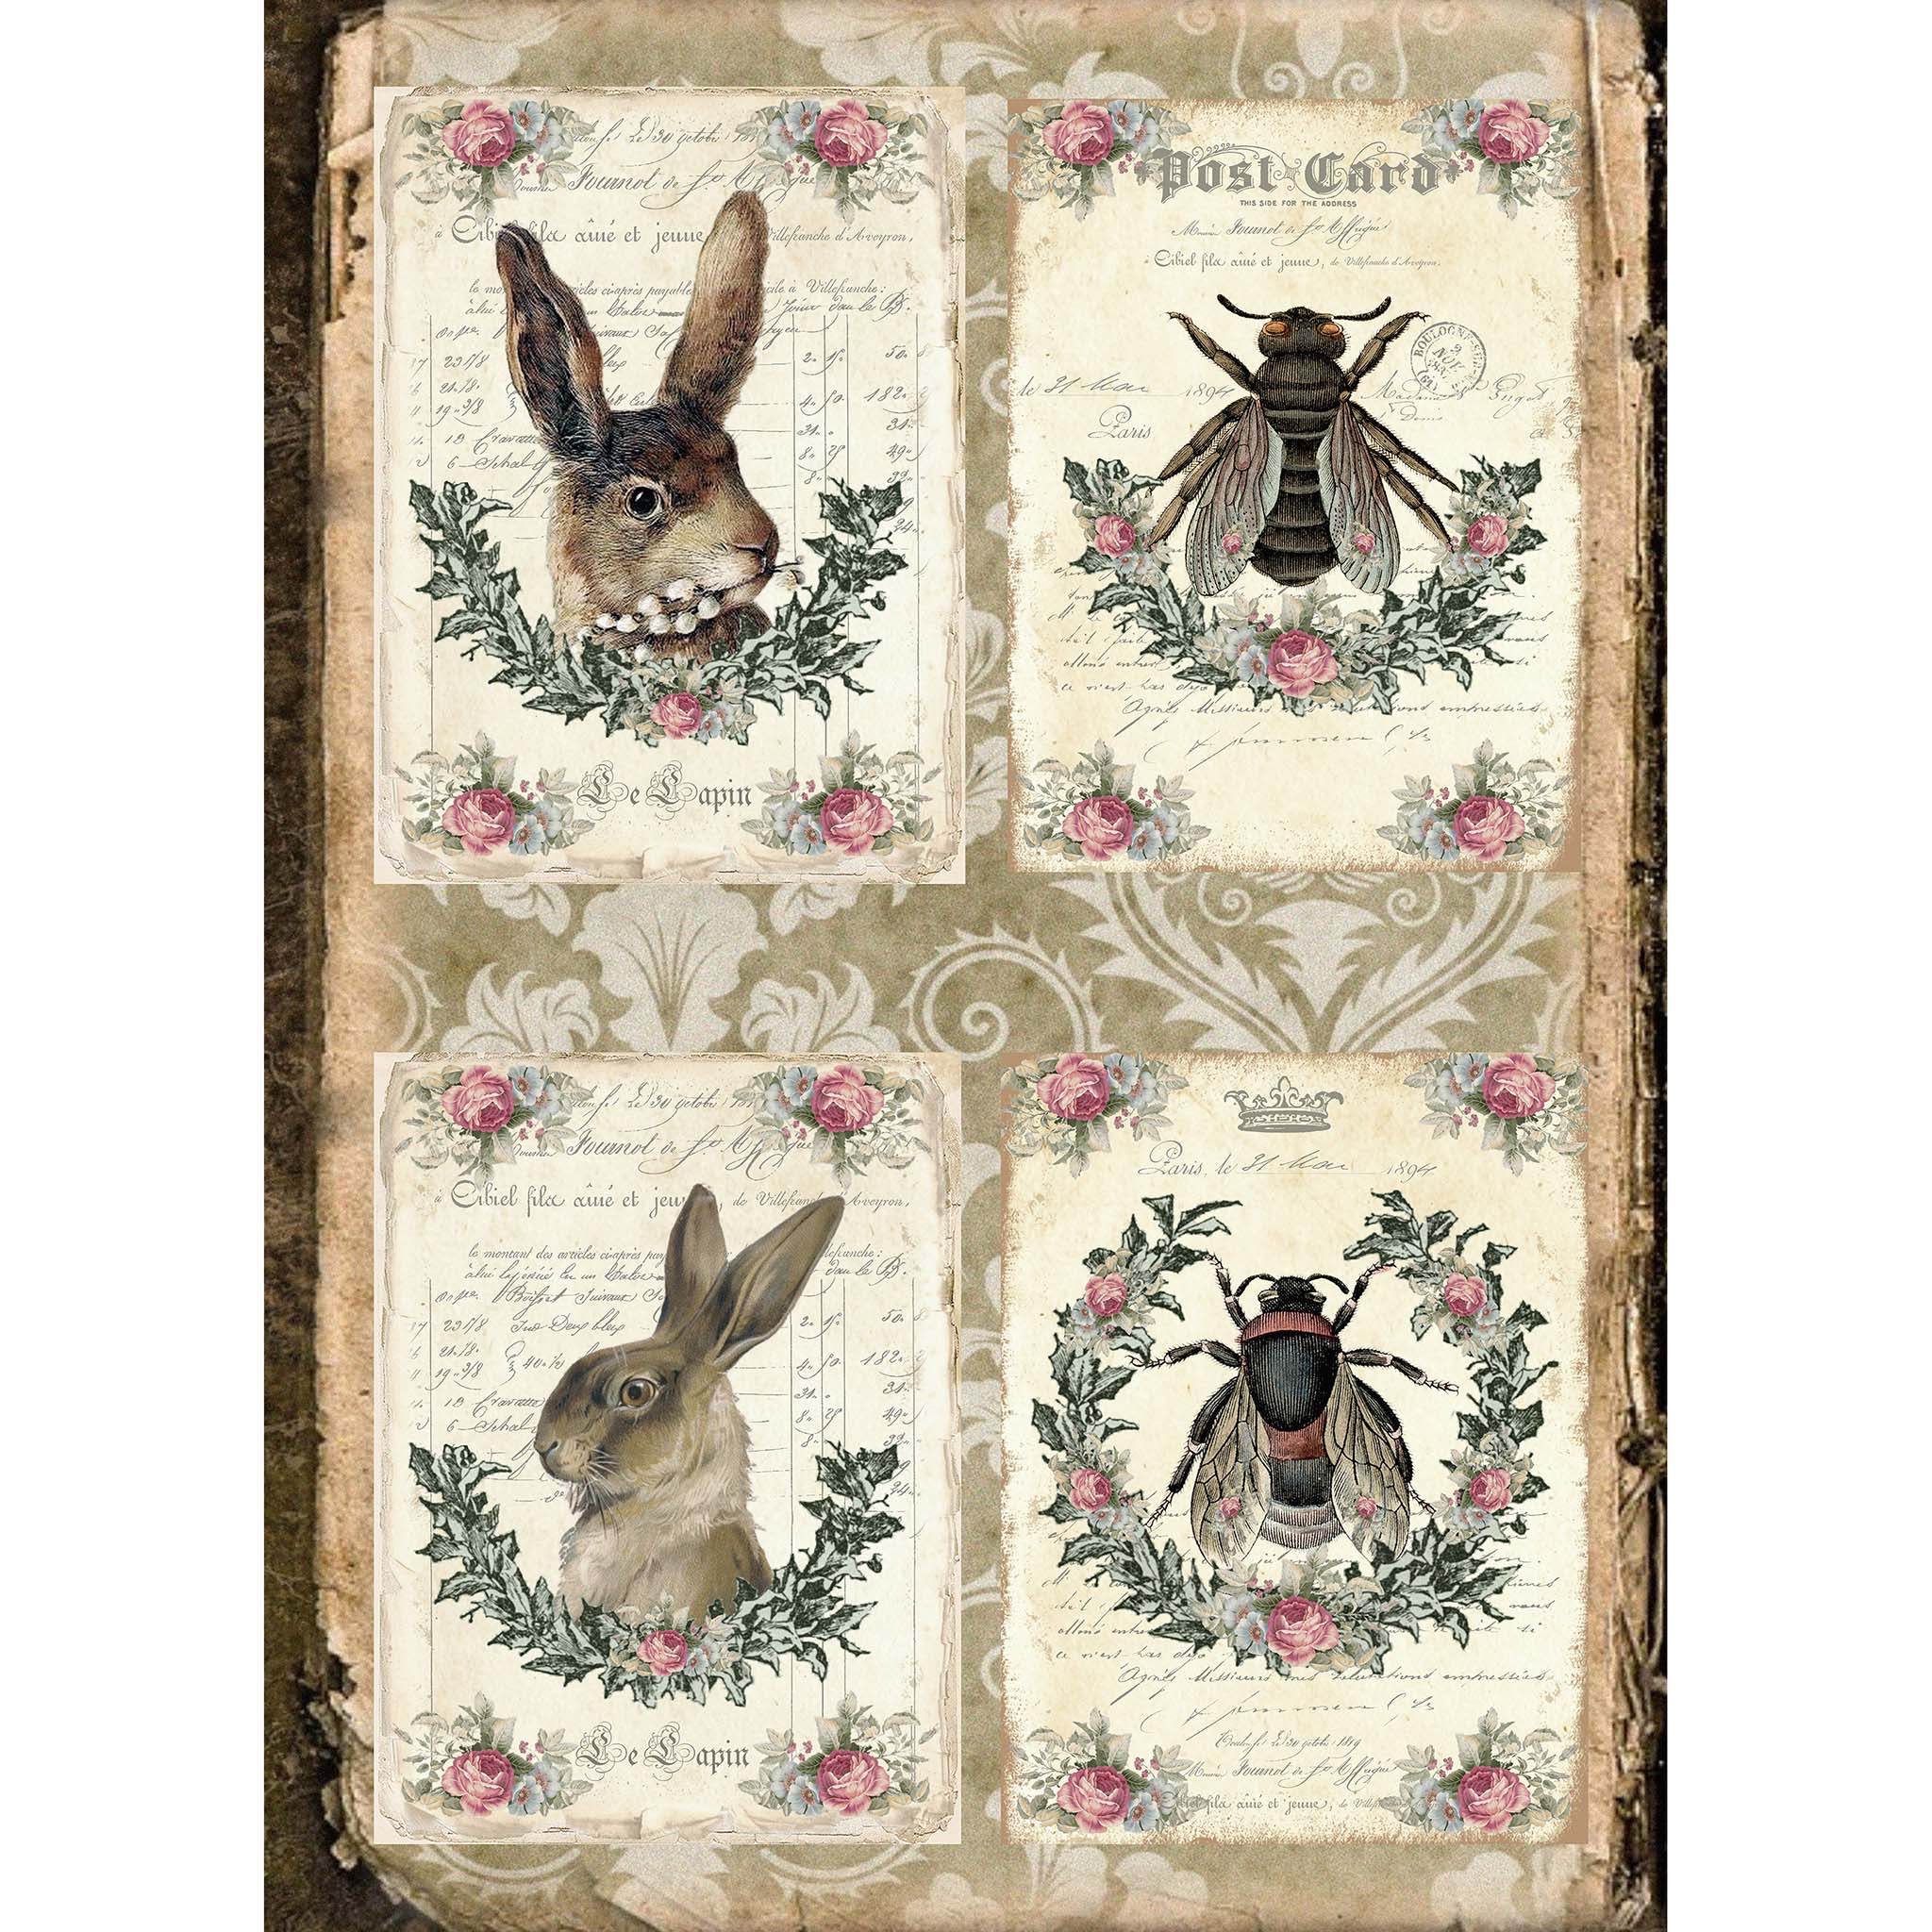 Tissue paper design that features  4 vintage slips of paper feature charming French script and adorable illustrations of rabbits, bees, and flowers. White borders are on the sides.